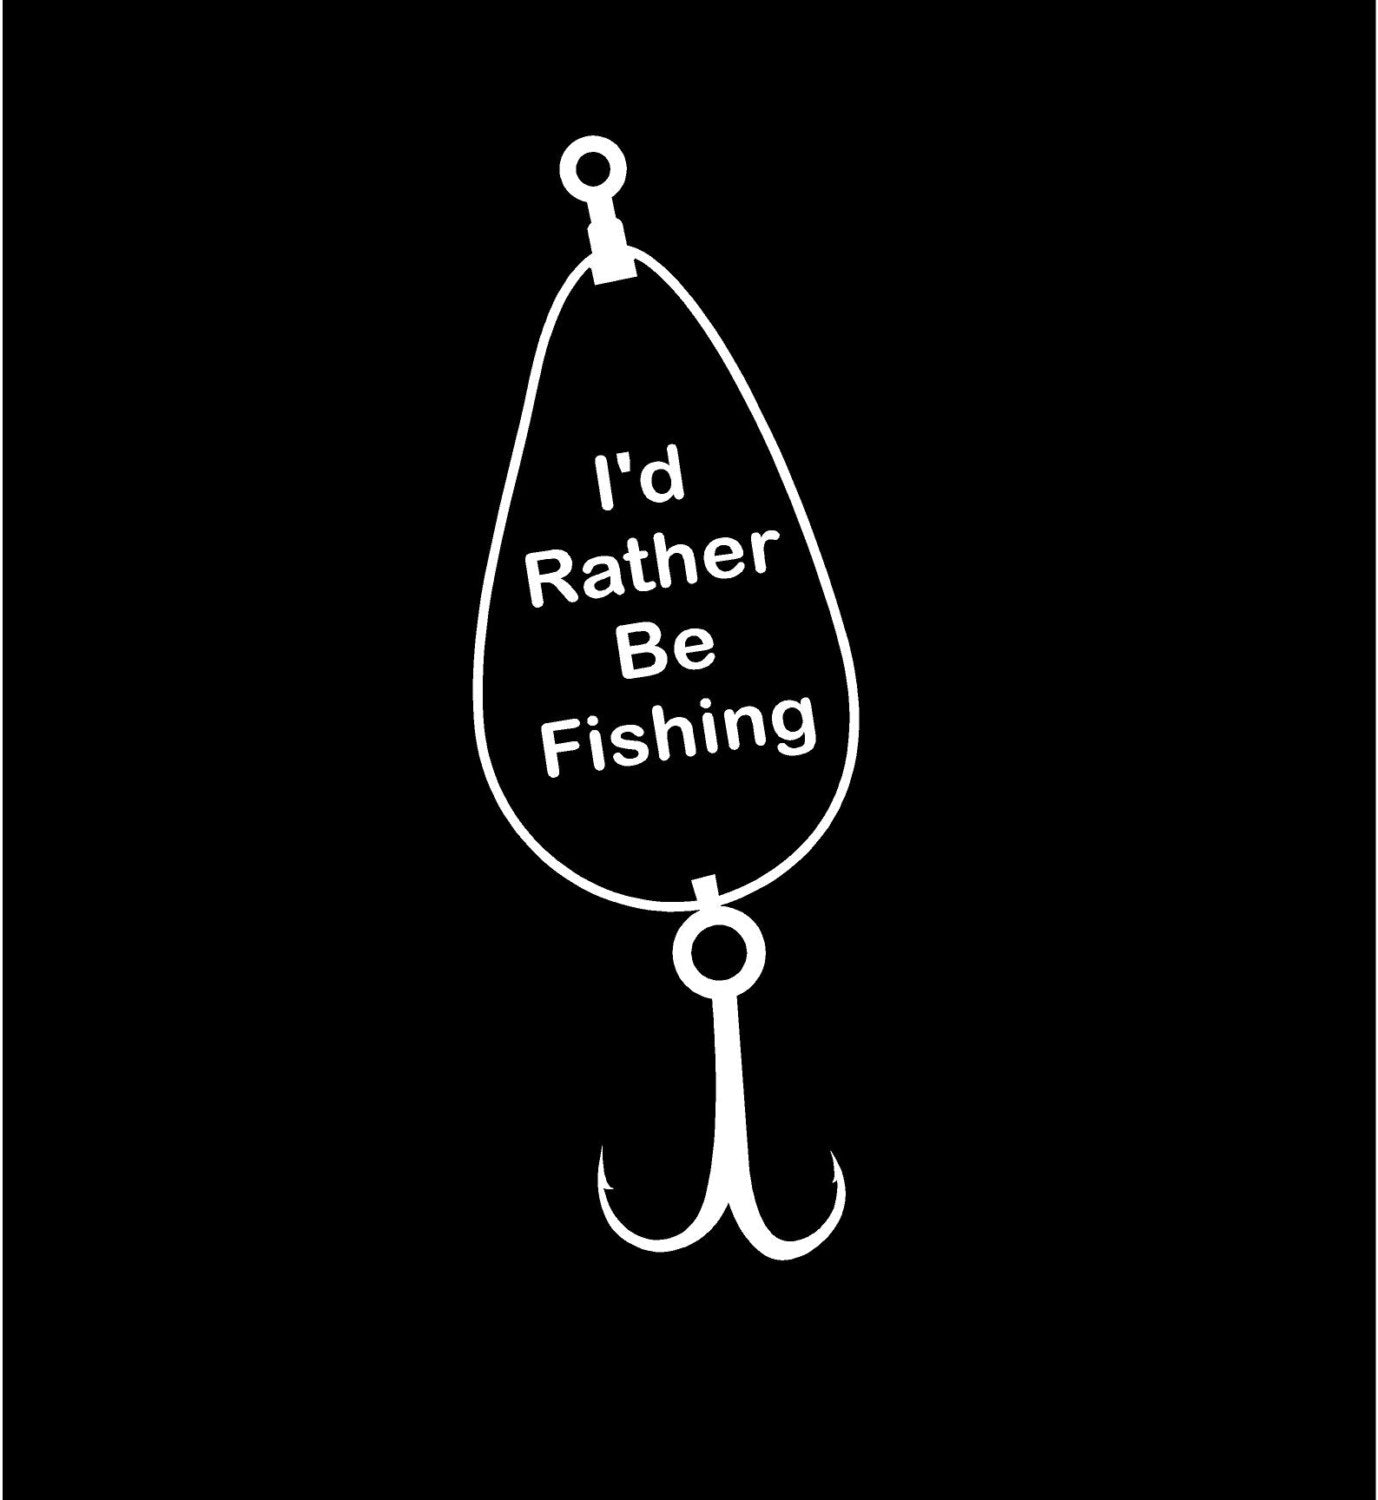 Fishing Lure I'd Rather Be Fishing decal car decal vinyl decal Car Auto Vehicle Window decal Sticker Fishing Lure Decal